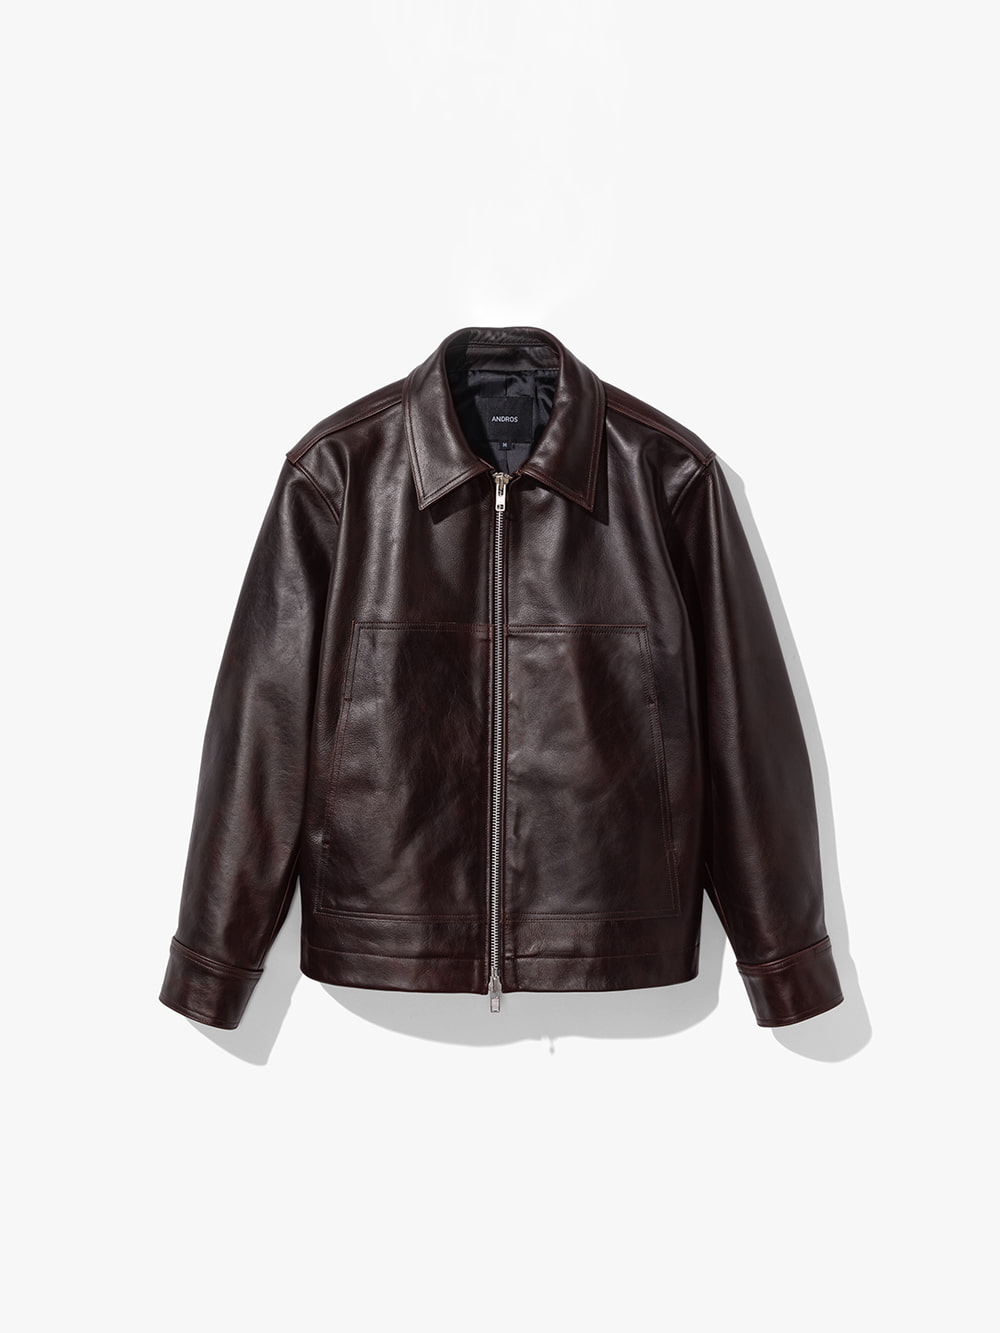 Double Pocket Cow Leather Jacket (Deep Brown)